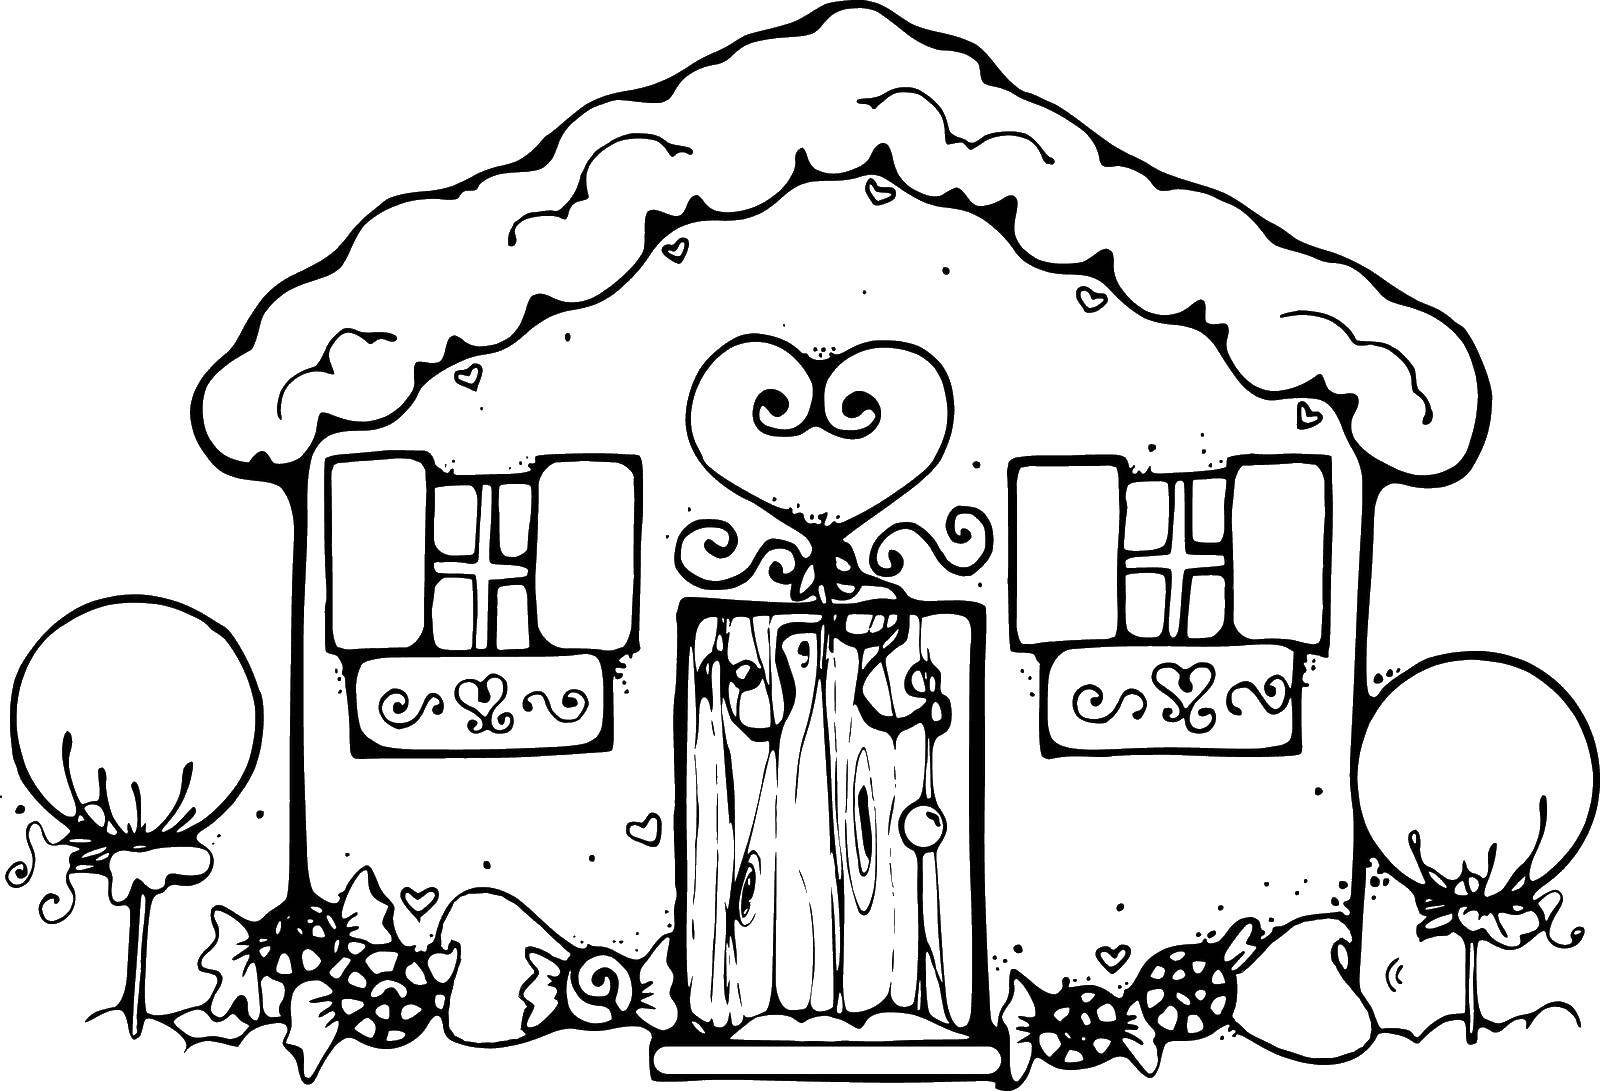 Coloring House of sweets. Category Coloring house. Tags:  house, candy, sweets, door.